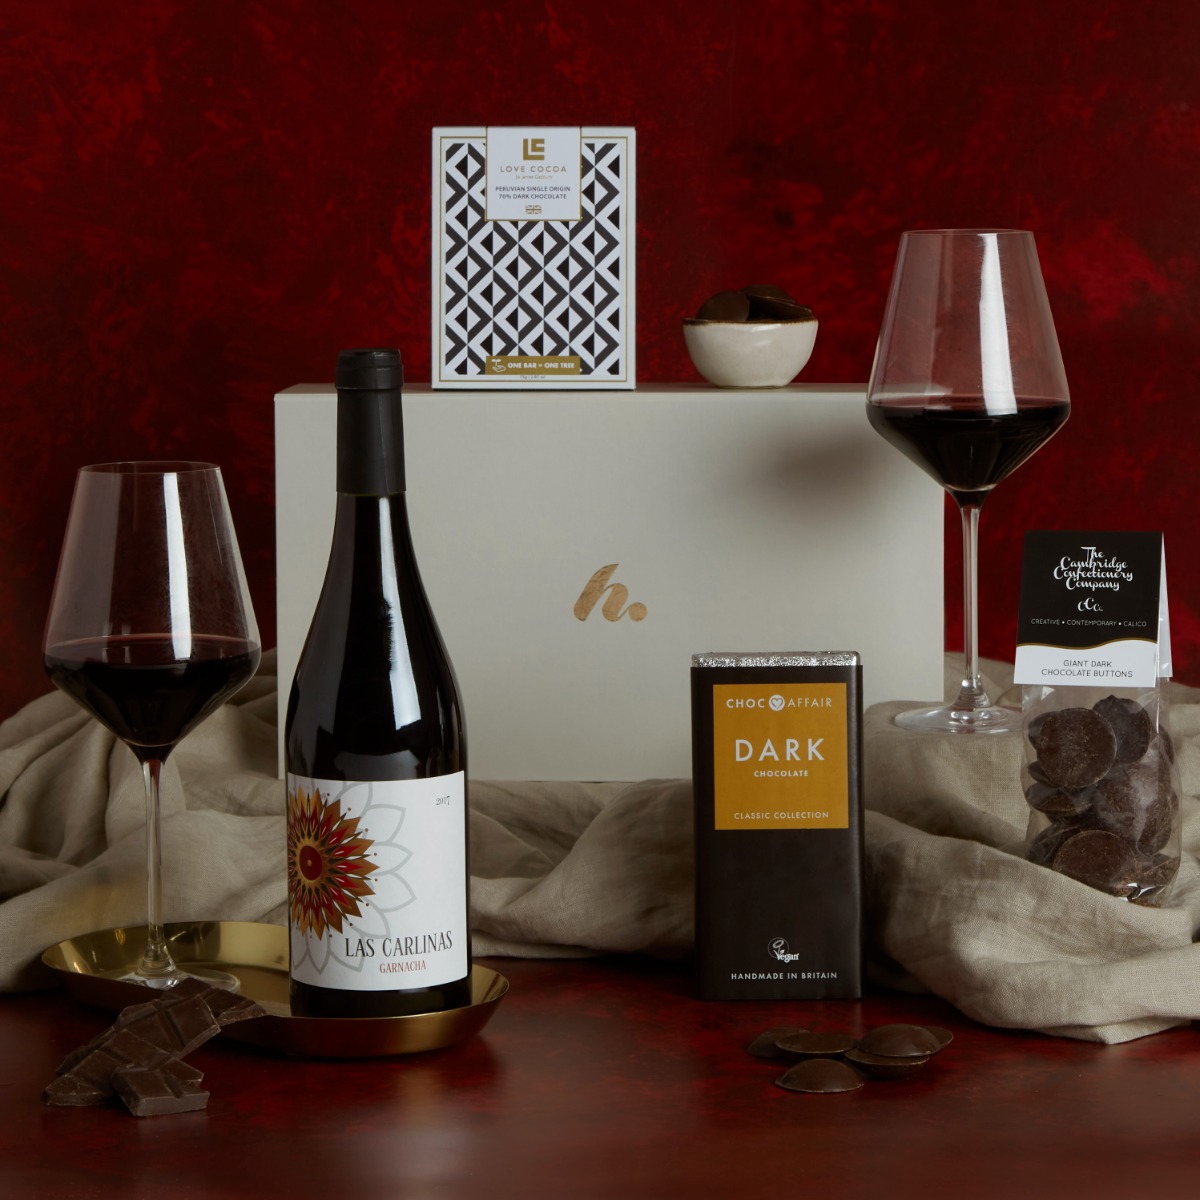 Valentine's Red Wine & Dark Chocolate gift hamper with contents on display and signature h box